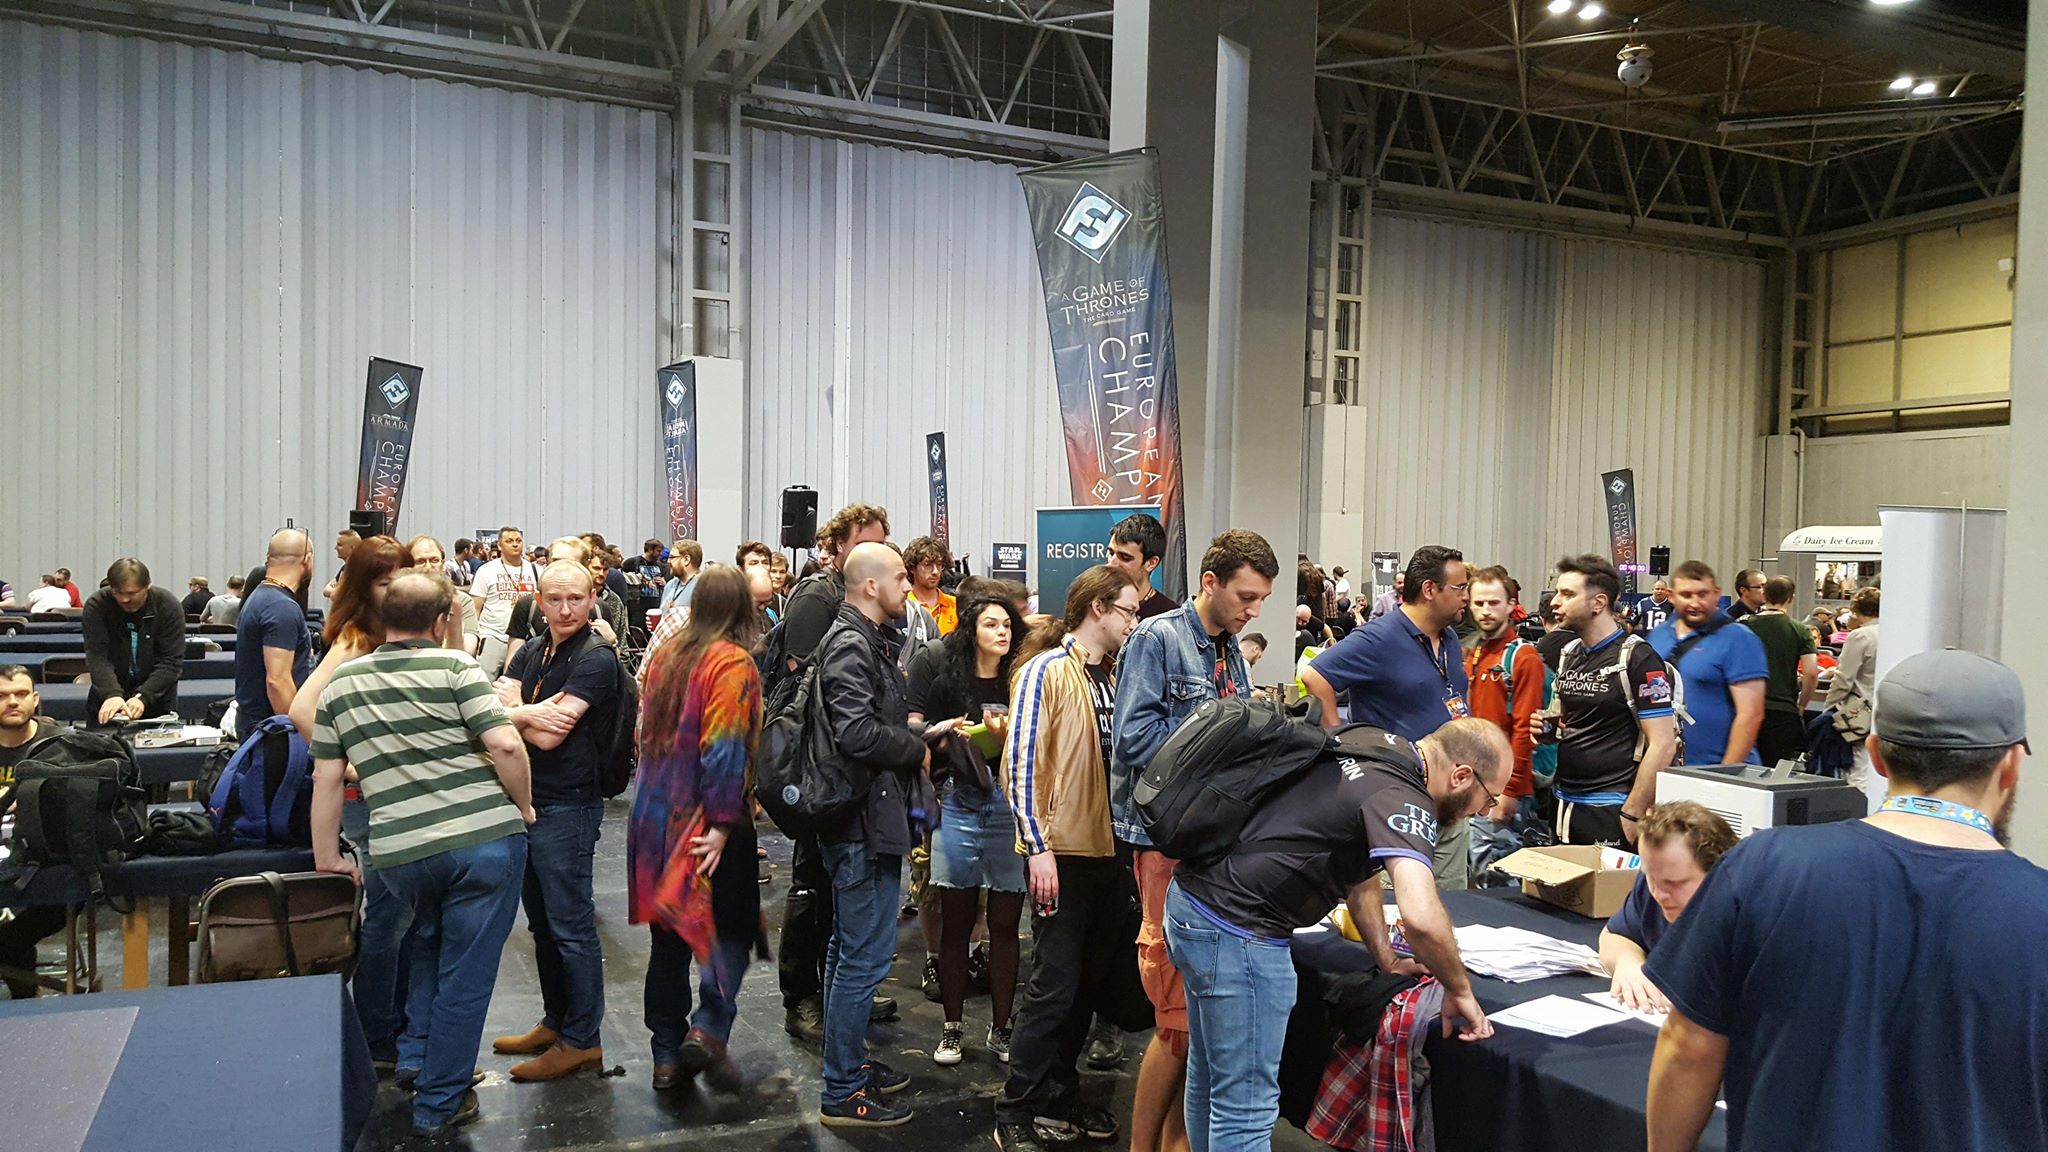 Day Two Begins At UK Games Expo – OnTableTop – Home of Beasts of War